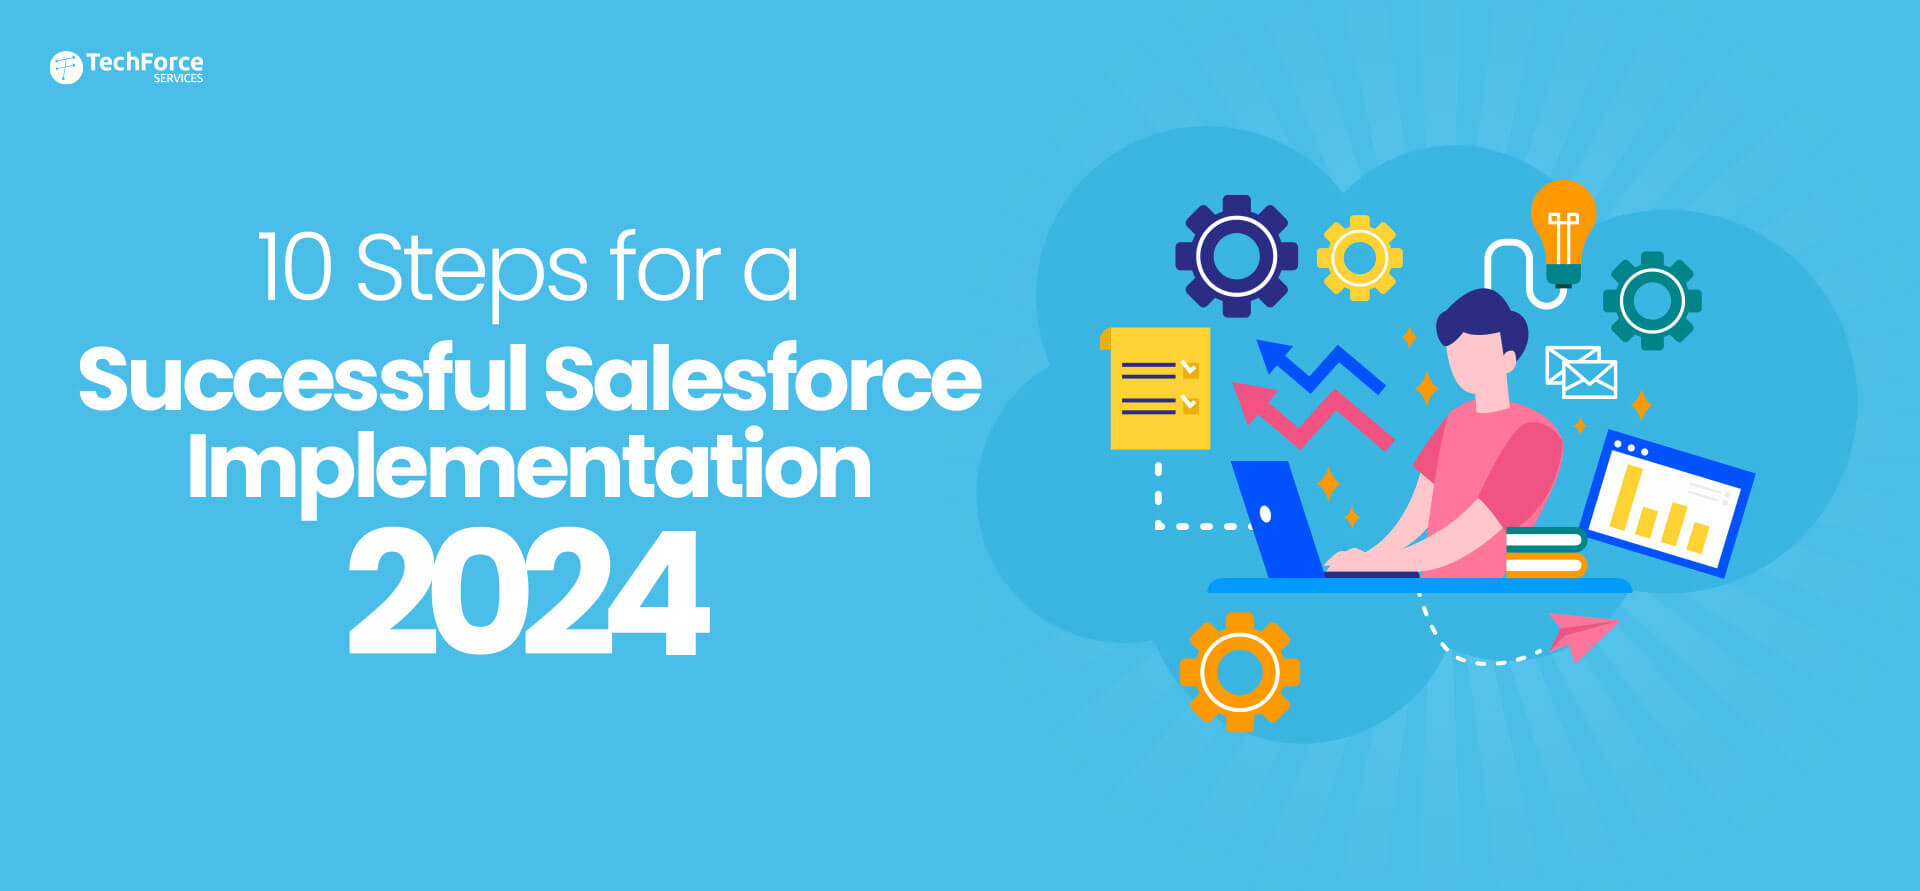 10-Steps-for-a-Successful-Salesforce-Implementation